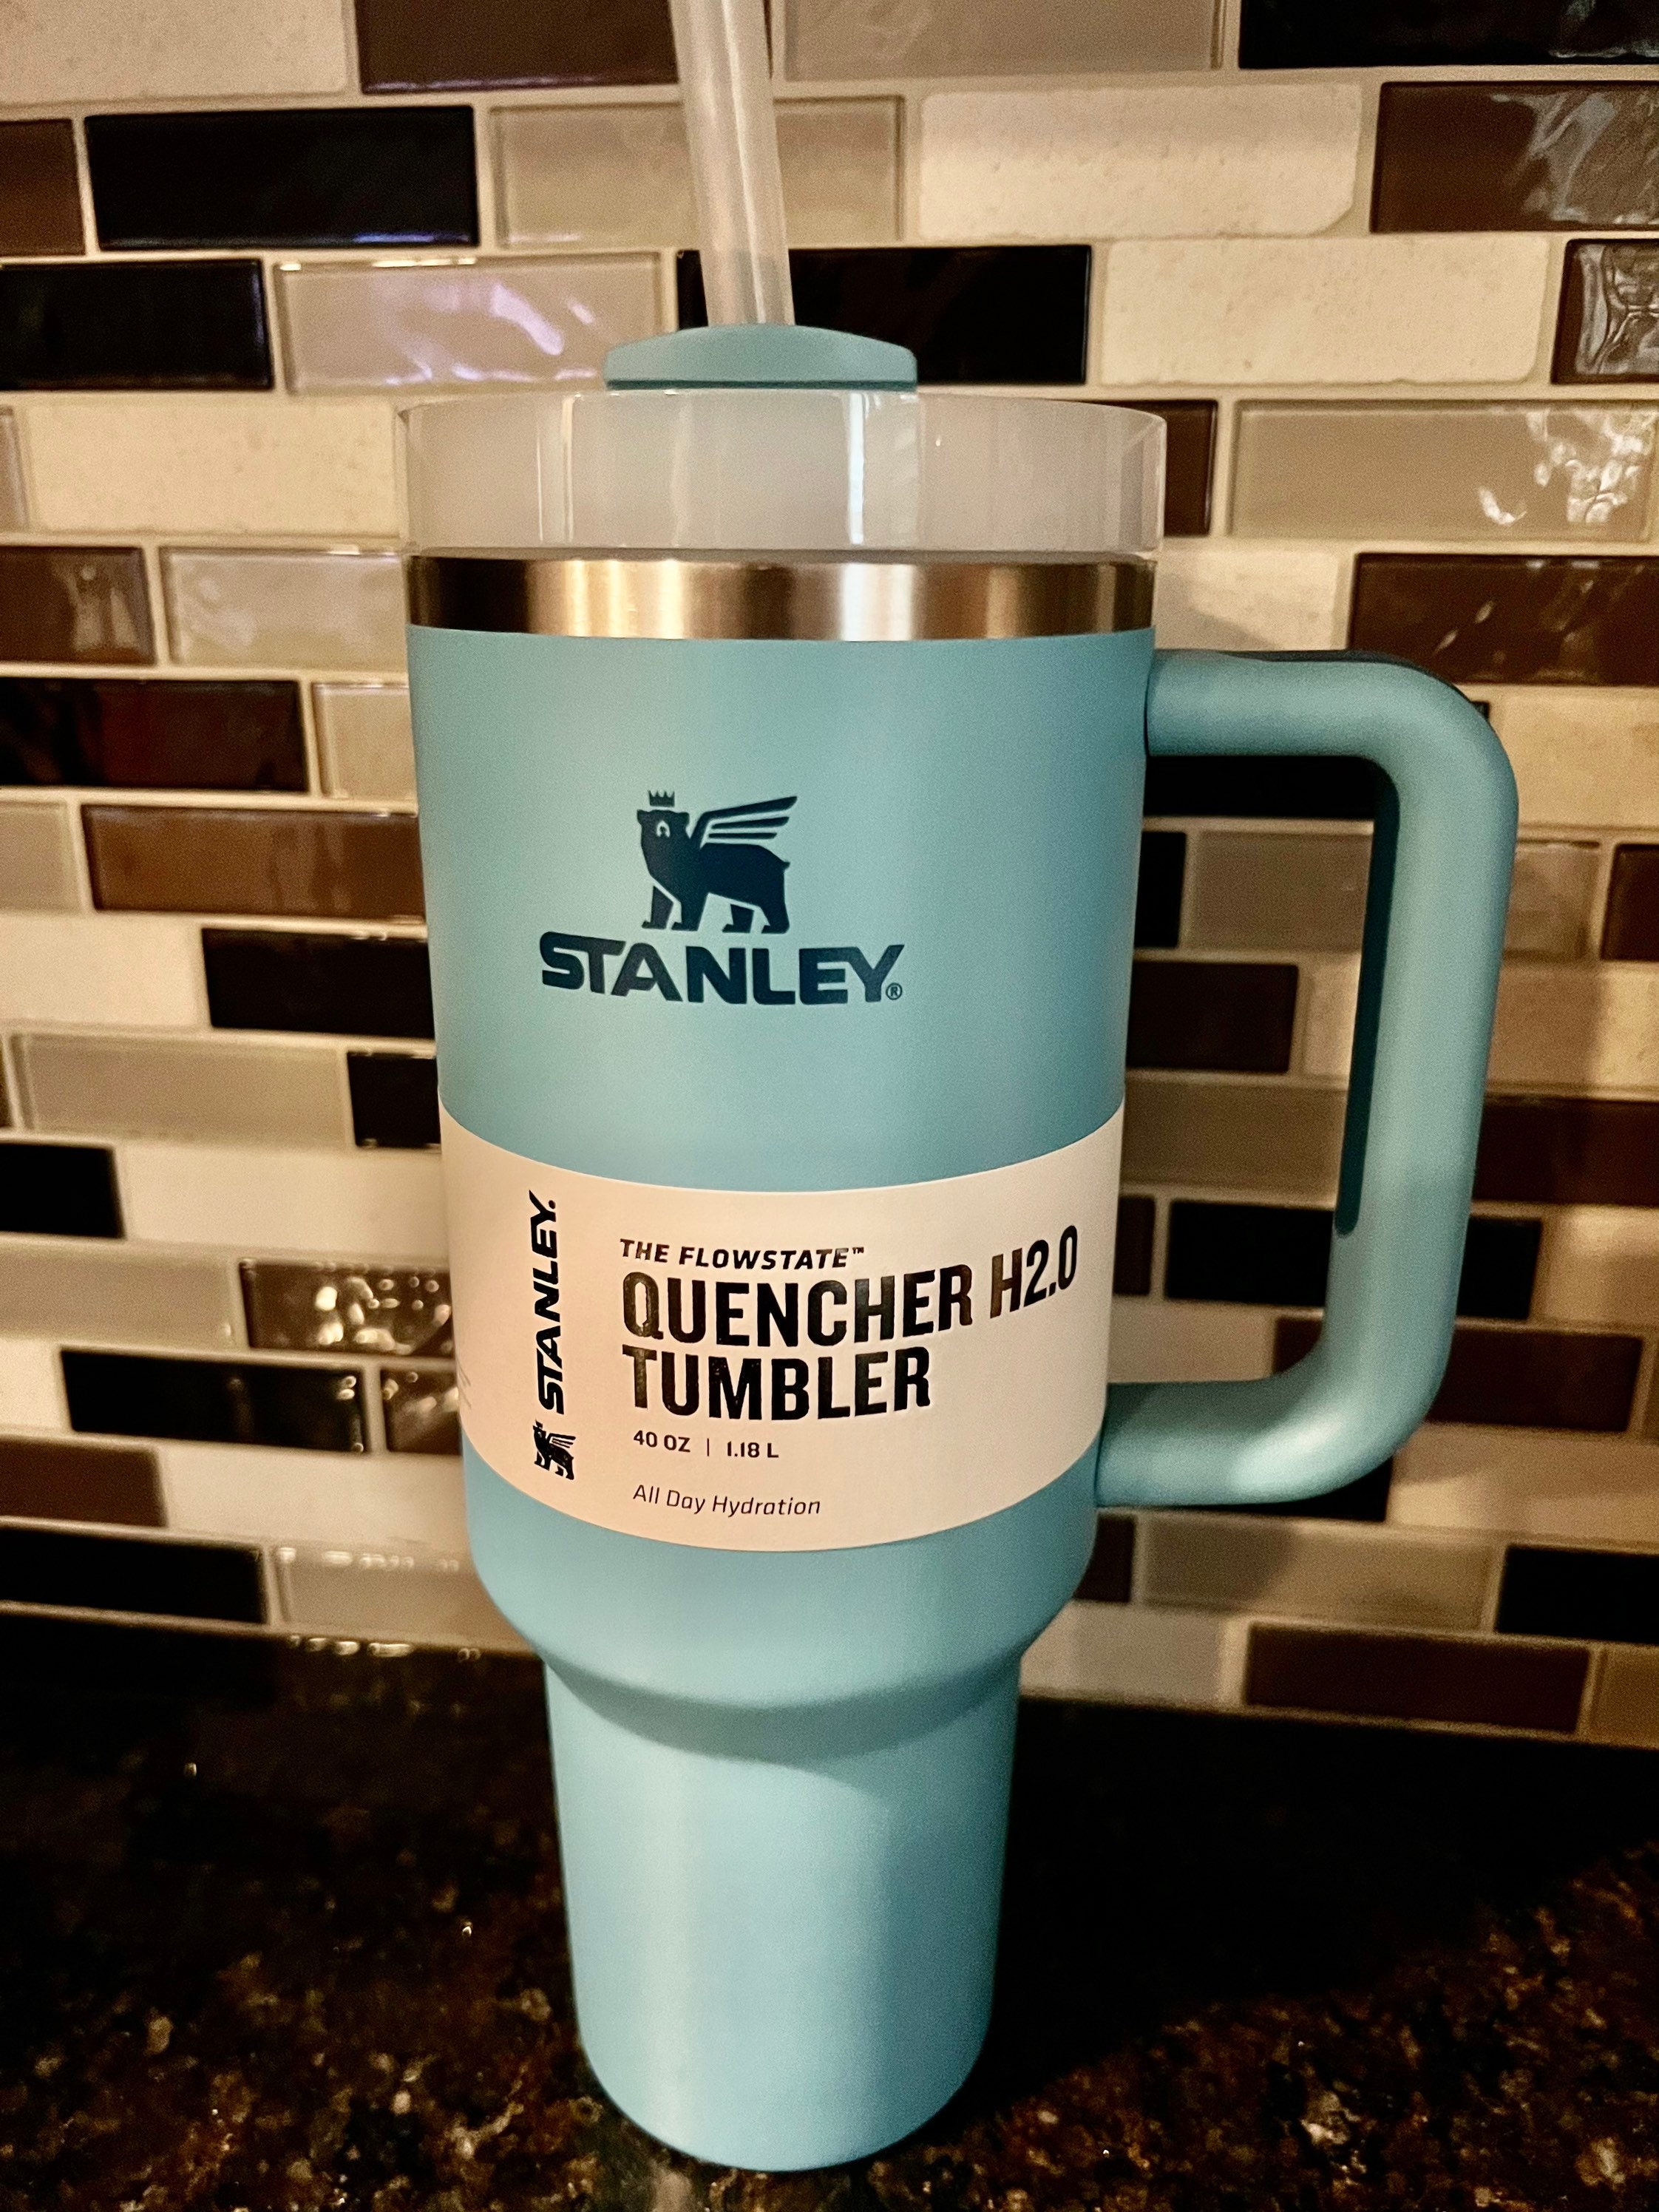 Stanley The Quencher H2.0 SOFT MATTE DUNE Flowstate Tumbler 40 OZ - FREE  SHIP